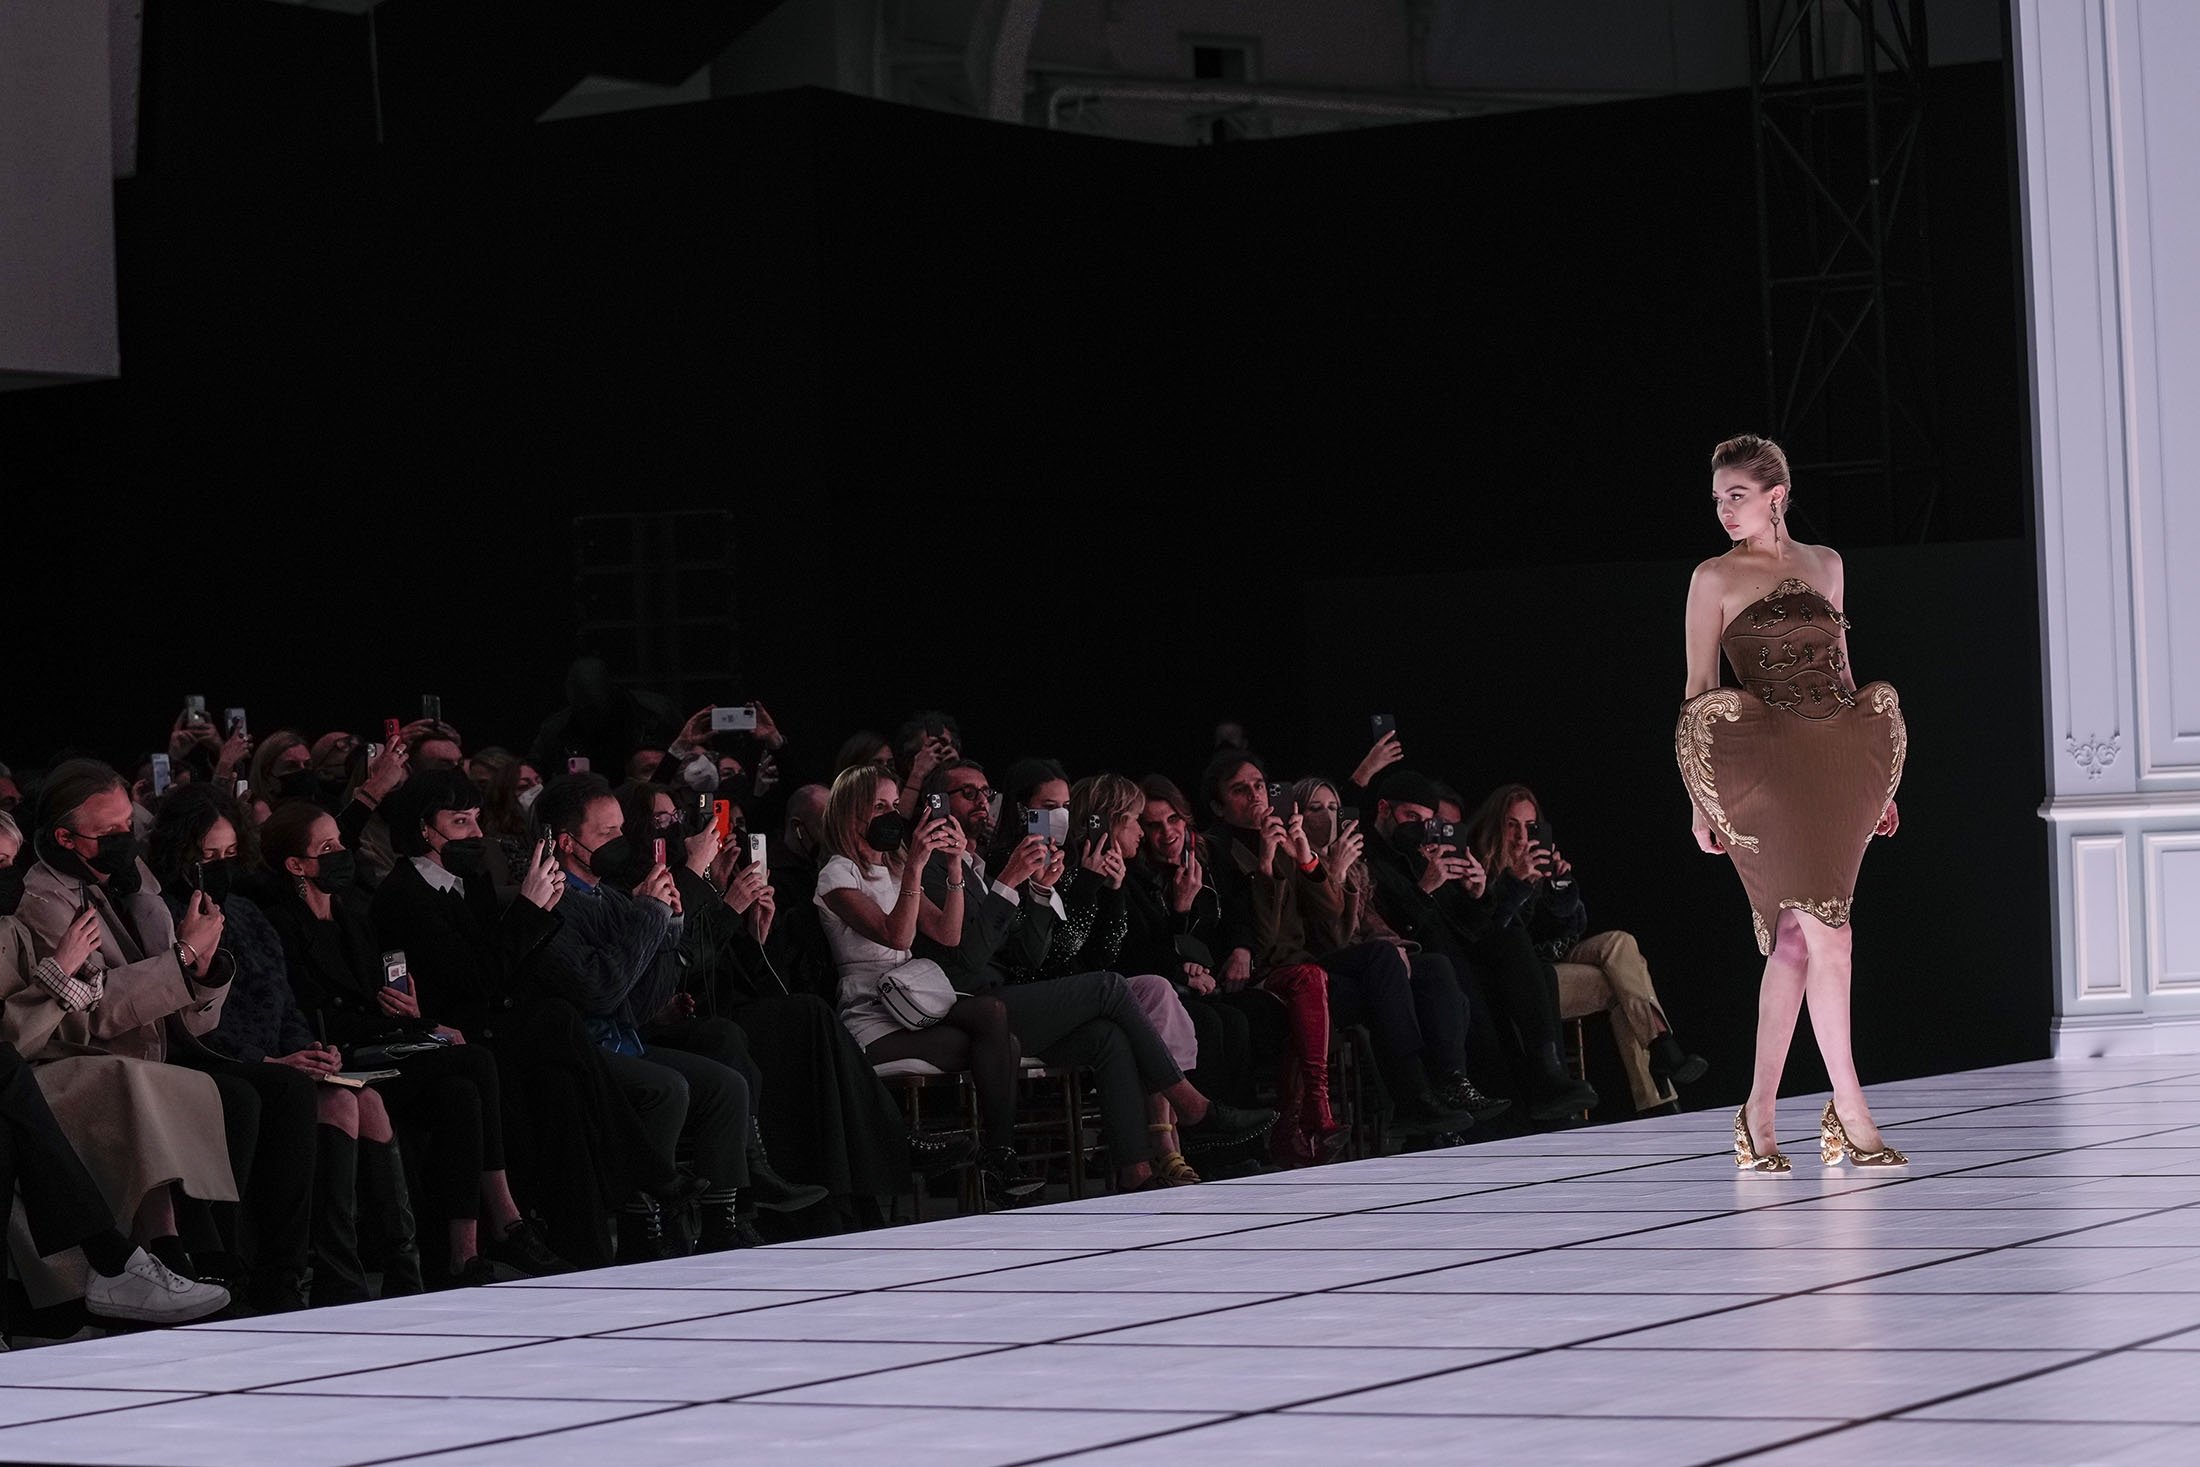 Out of this world: Best of Milan Fashion Week 2022 | Daily Sabah